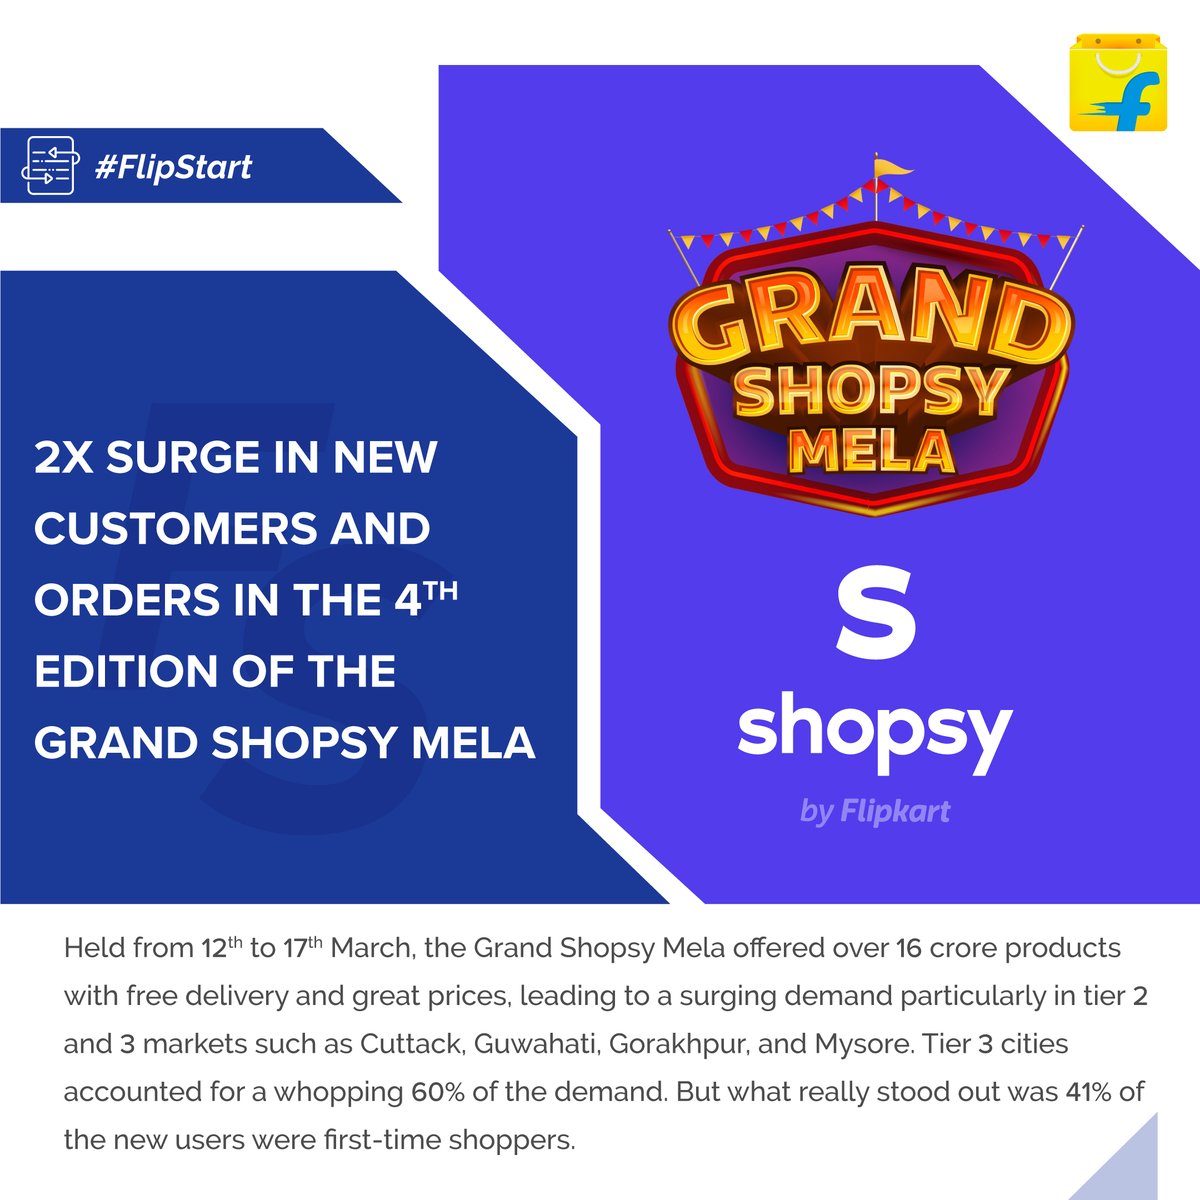 The 4th edition of Grand Shopsy Mela stands out for its penetration into tier-2 and 3 cities, with the latter contributing 60% of the total customer demand, as well as 2X surge in seller participation from cities like Delhi NCR, Surat, Jaipur, Panipat, and Rajkot. Read…